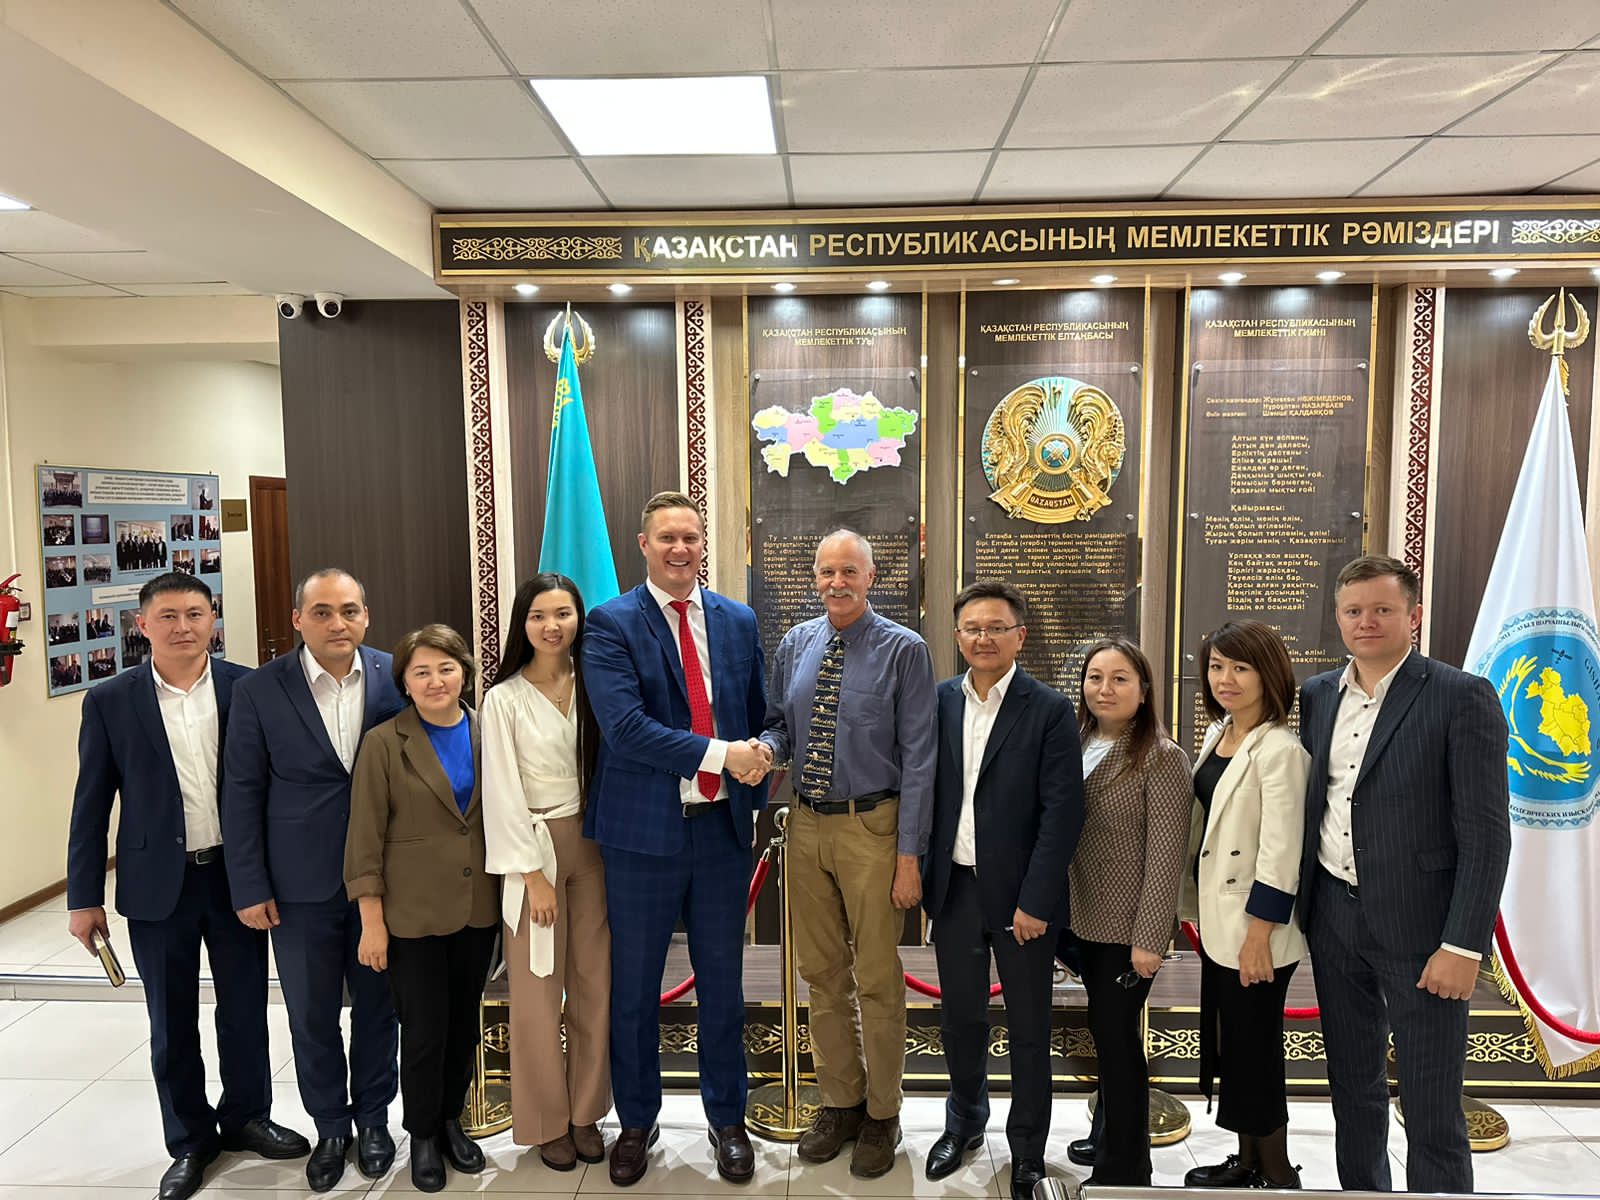 Professor Young with leaders of the Kazakh Air Photo Bureau